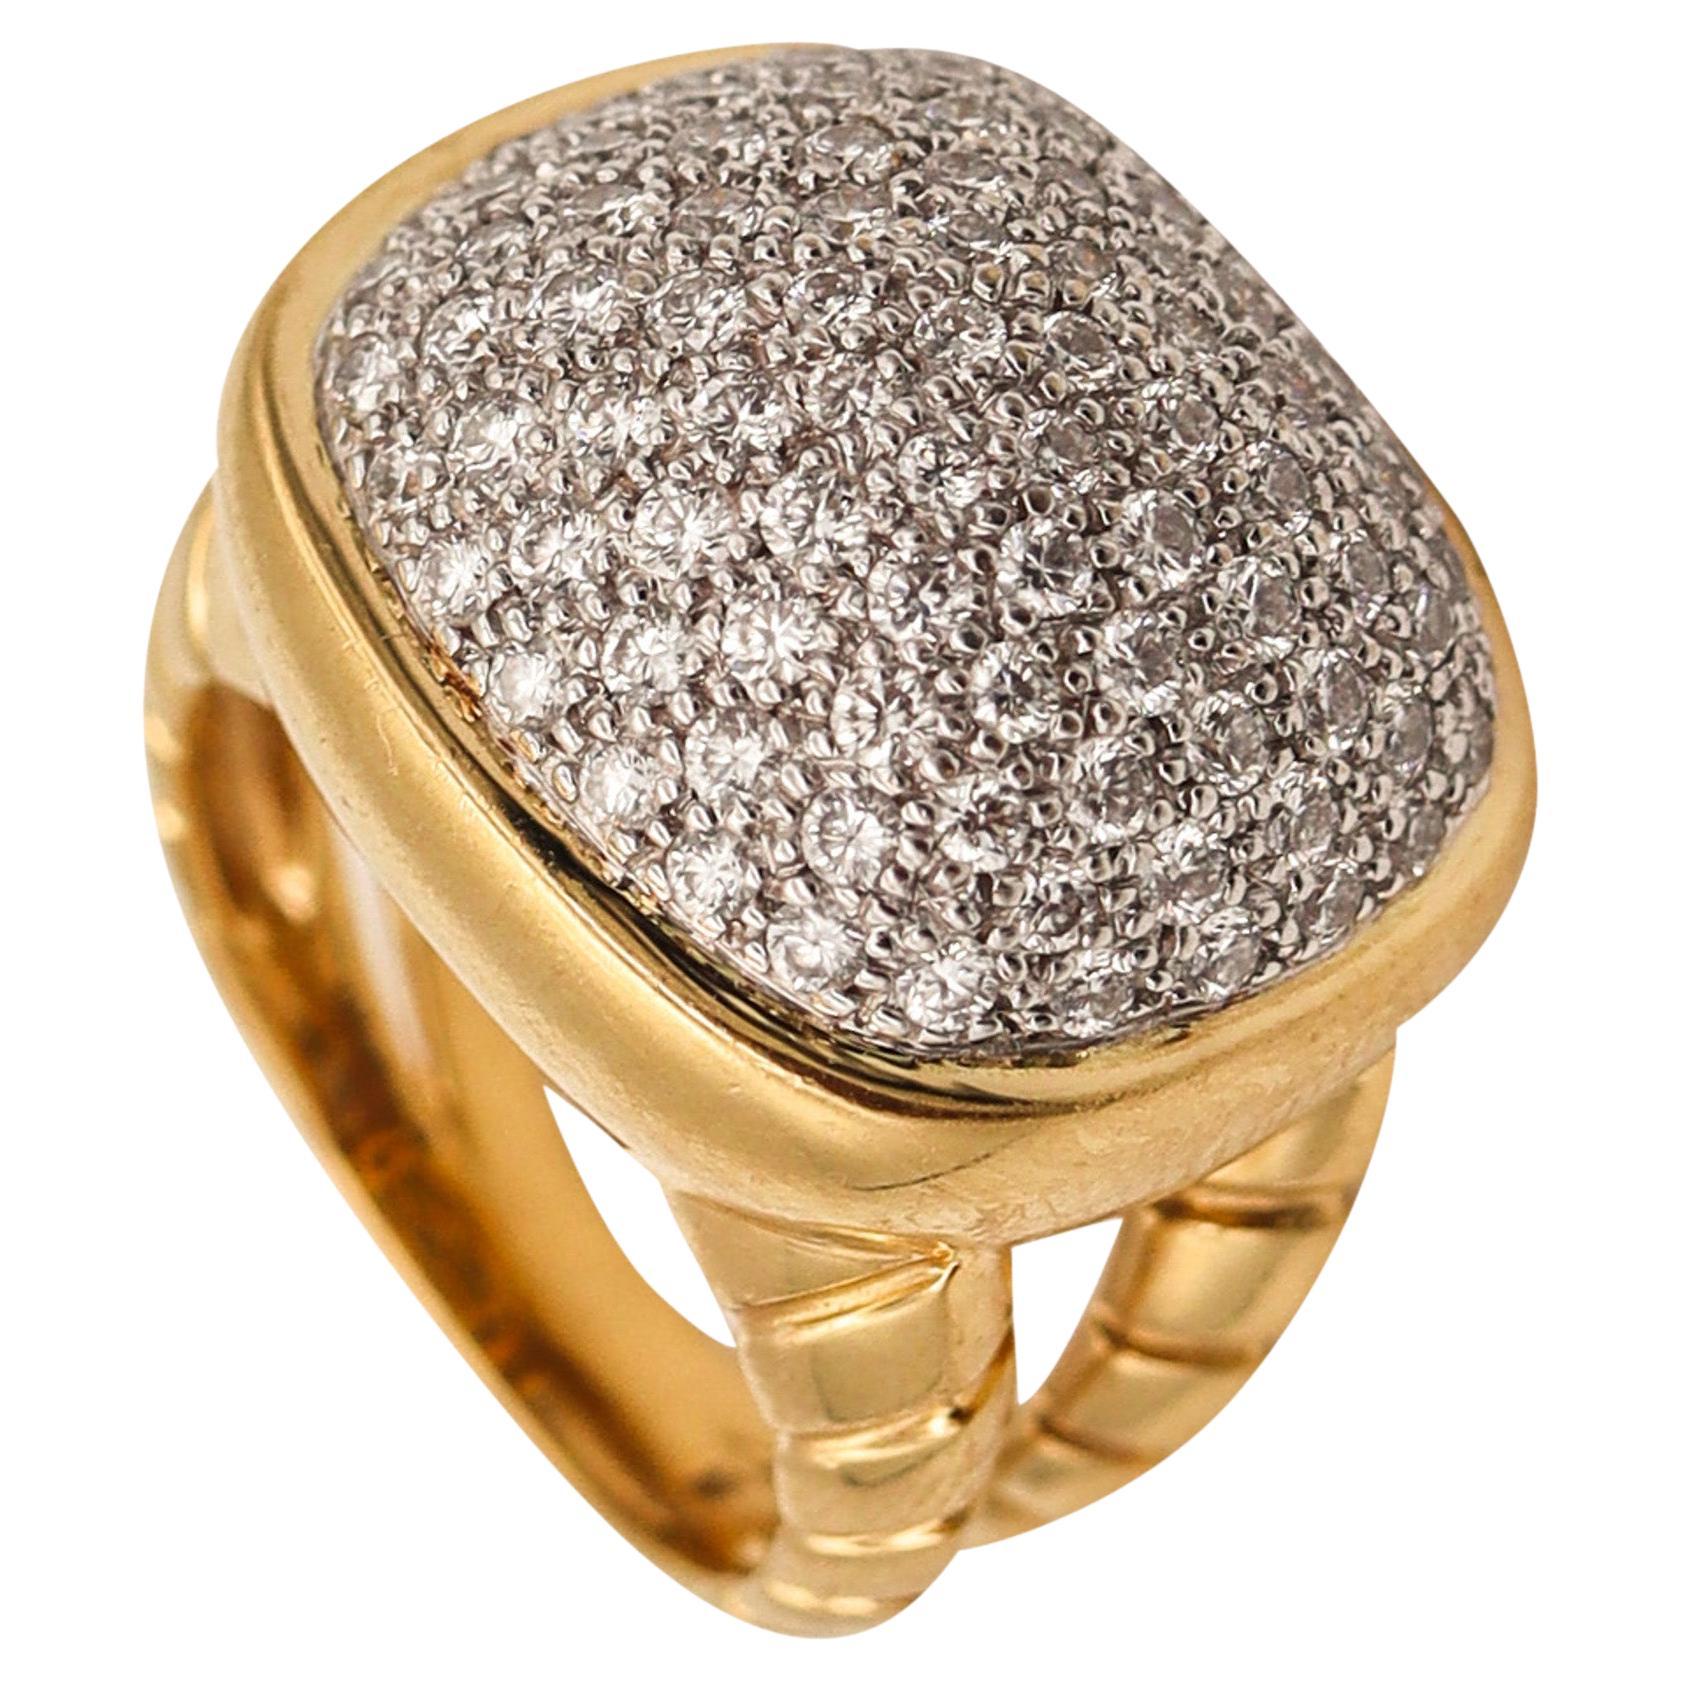 Marina B. Milano Tiguella Pave Cocktail Ring in 18kt Gold with 2.55ctw Diamonds For Sale